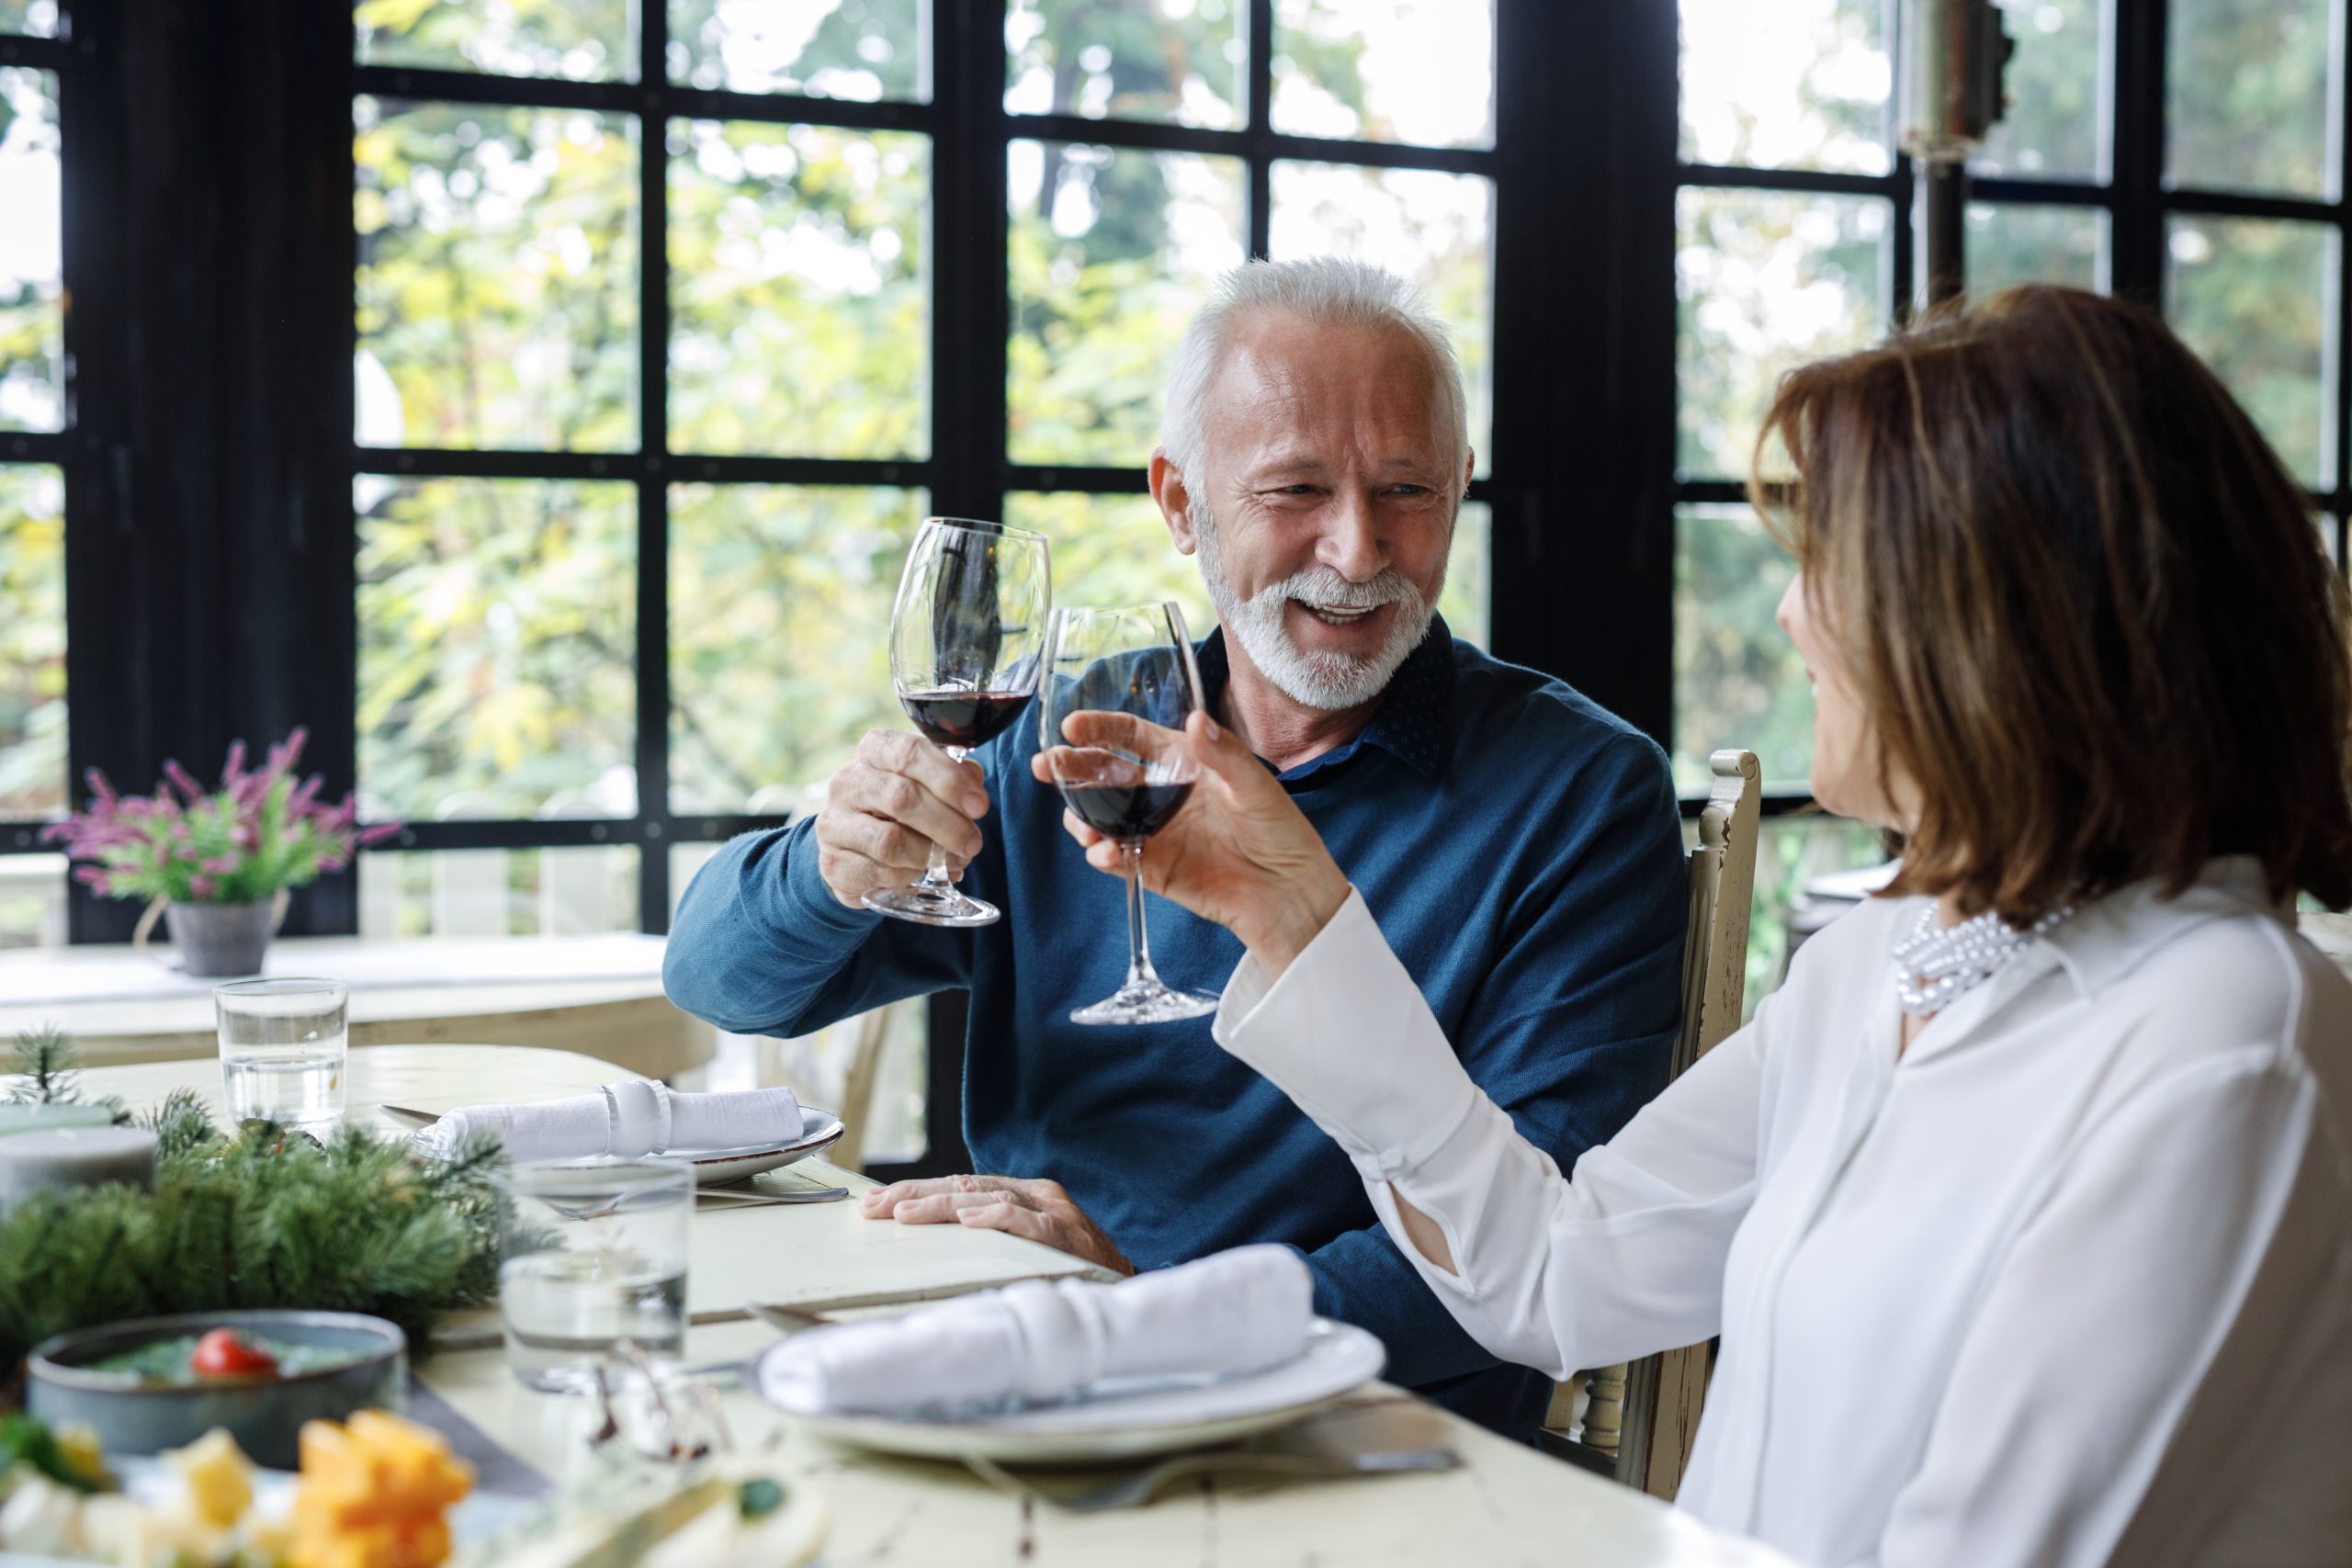 An elderly couple celebrating with wine at a restaurant, raising their glasses in a toast.